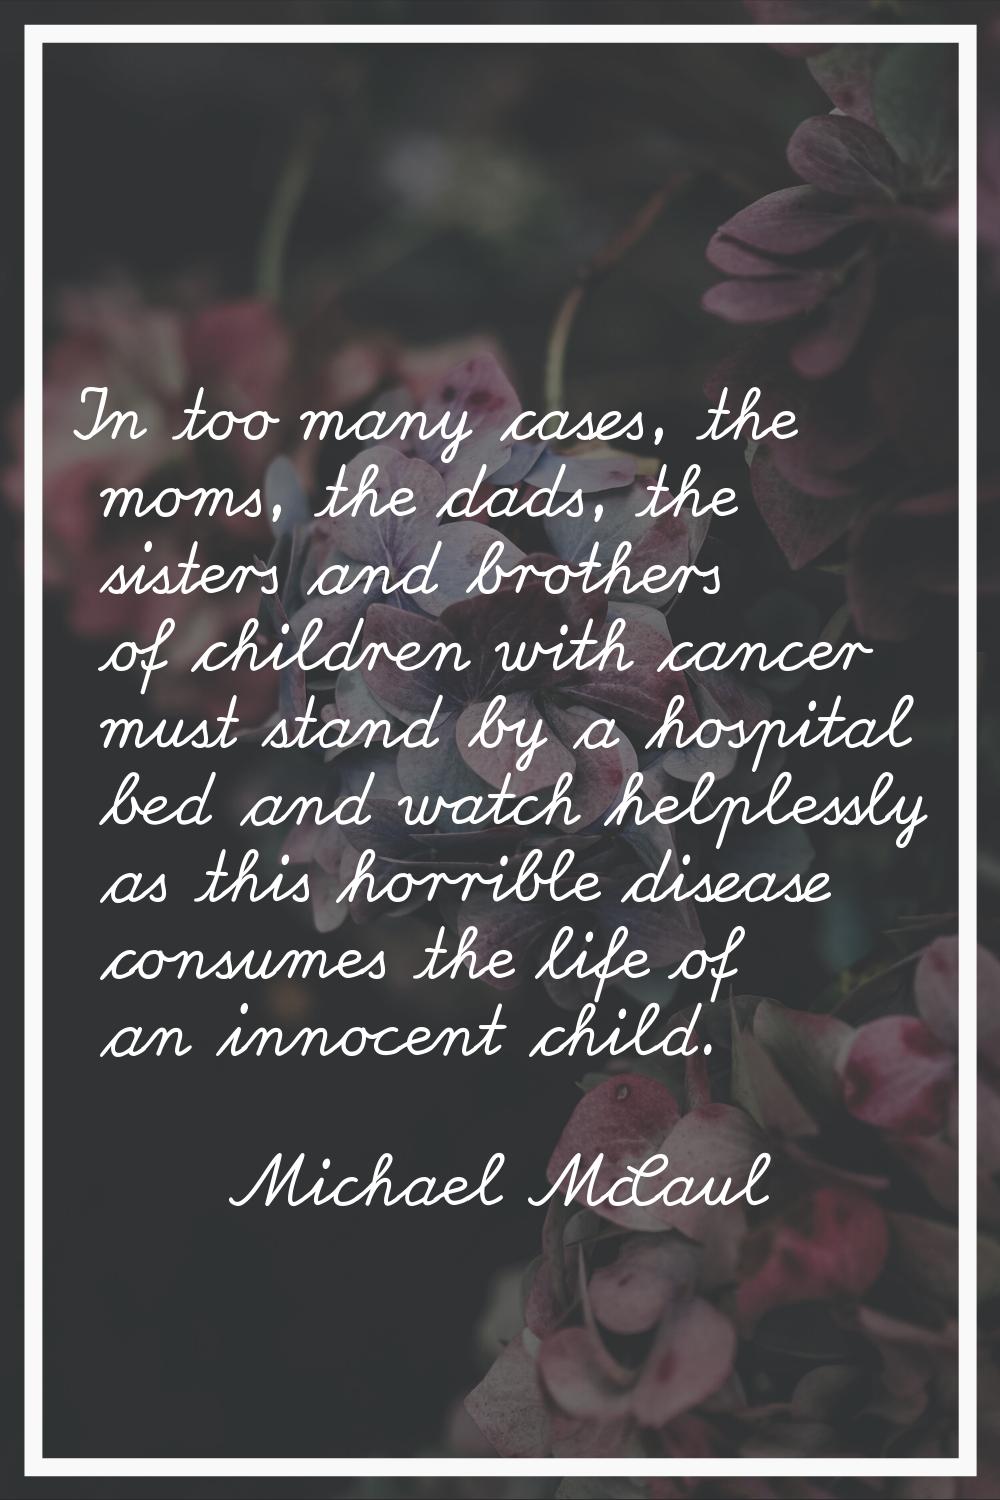 In too many cases, the moms, the dads, the sisters and brothers of children with cancer must stand 